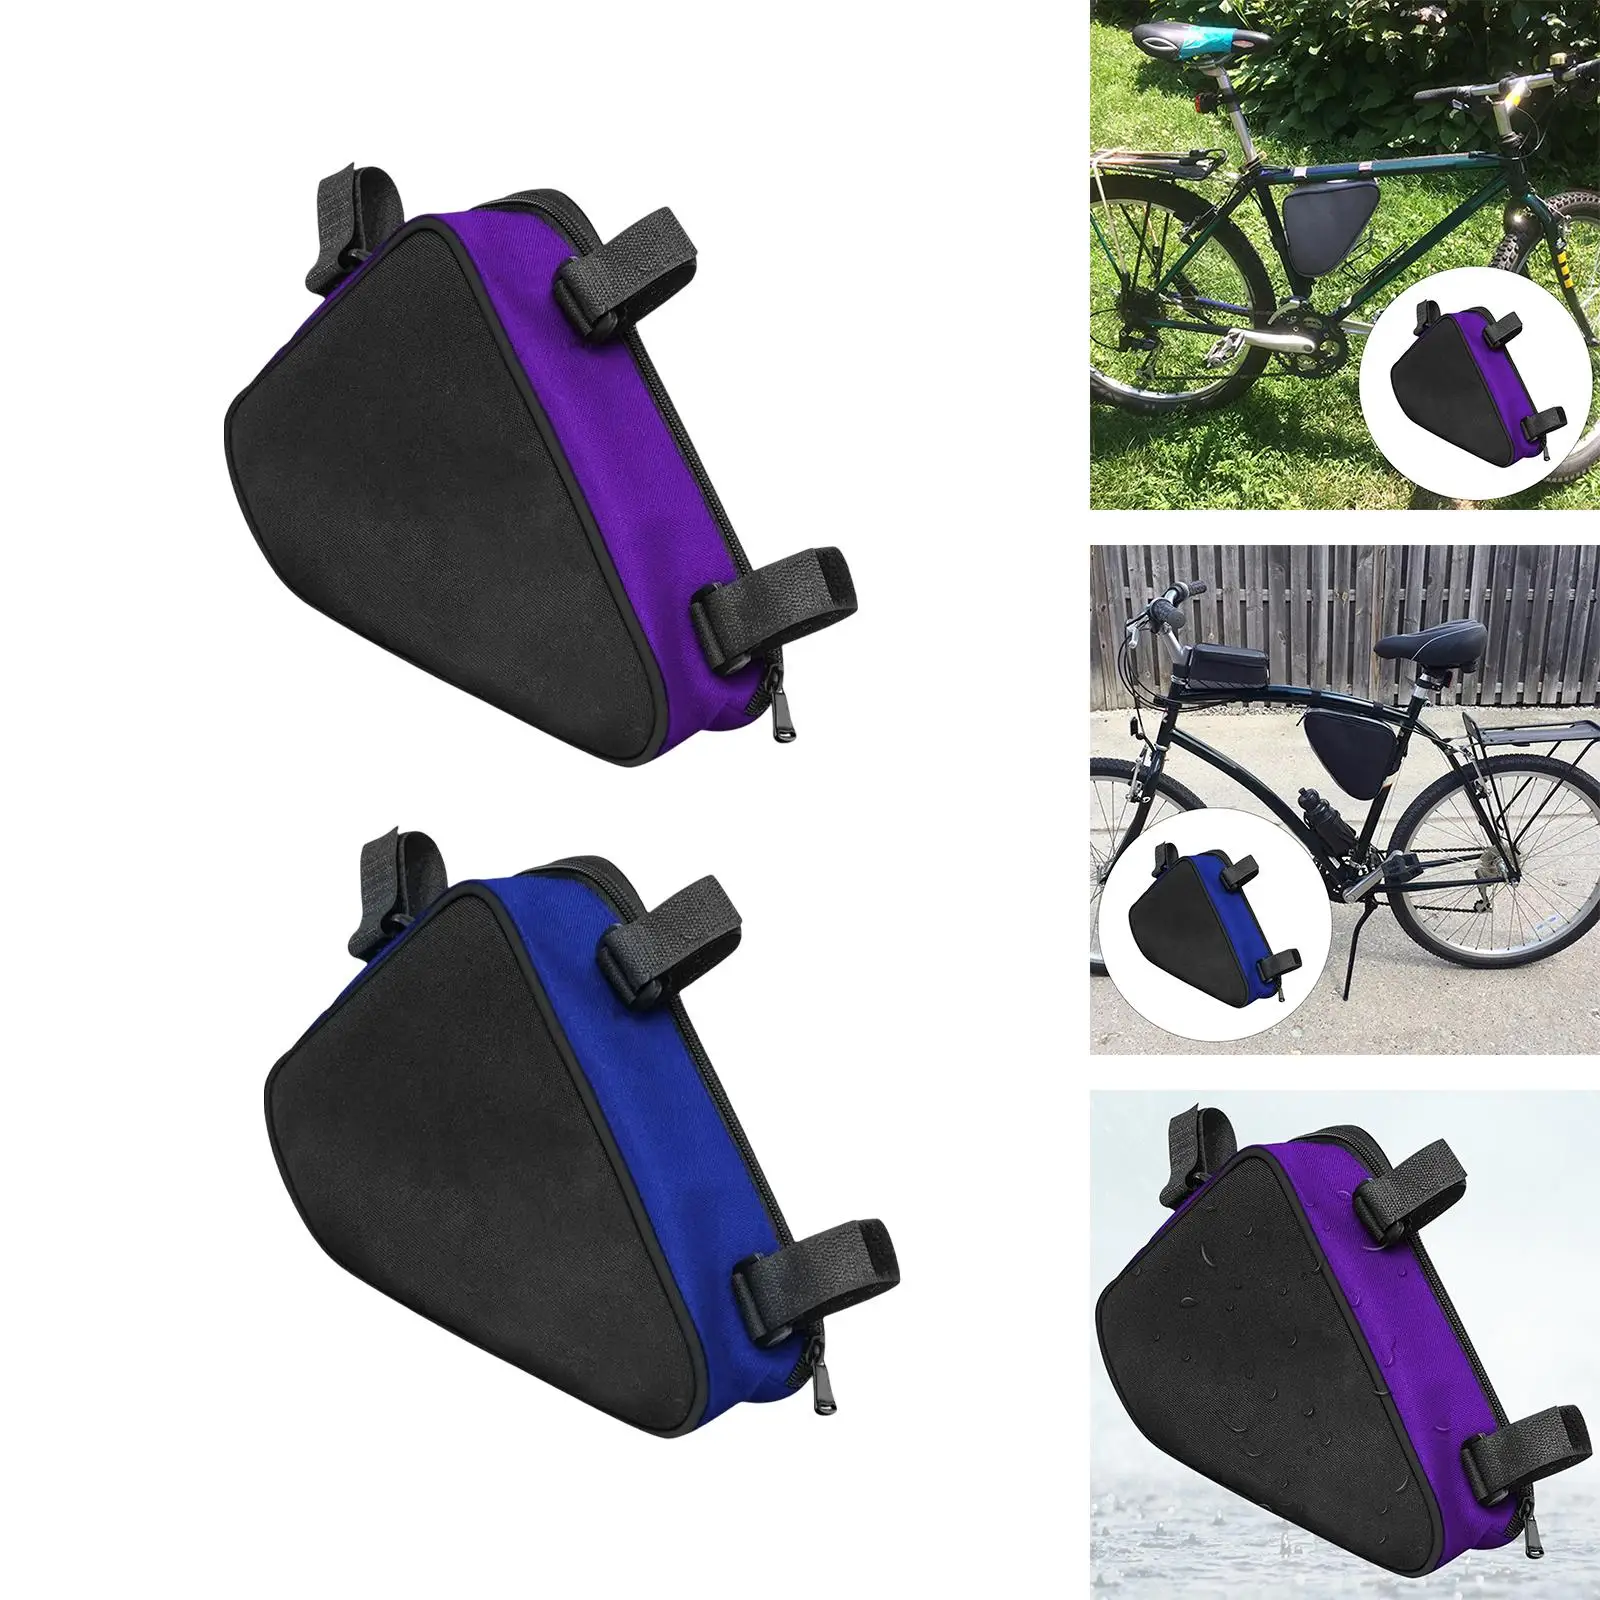 Bike Triangle Bag for Large Size Road Bike Pouch Bag Cycling Accessories Pack with Plenty of Space for Cellphone, Wallet, Tools